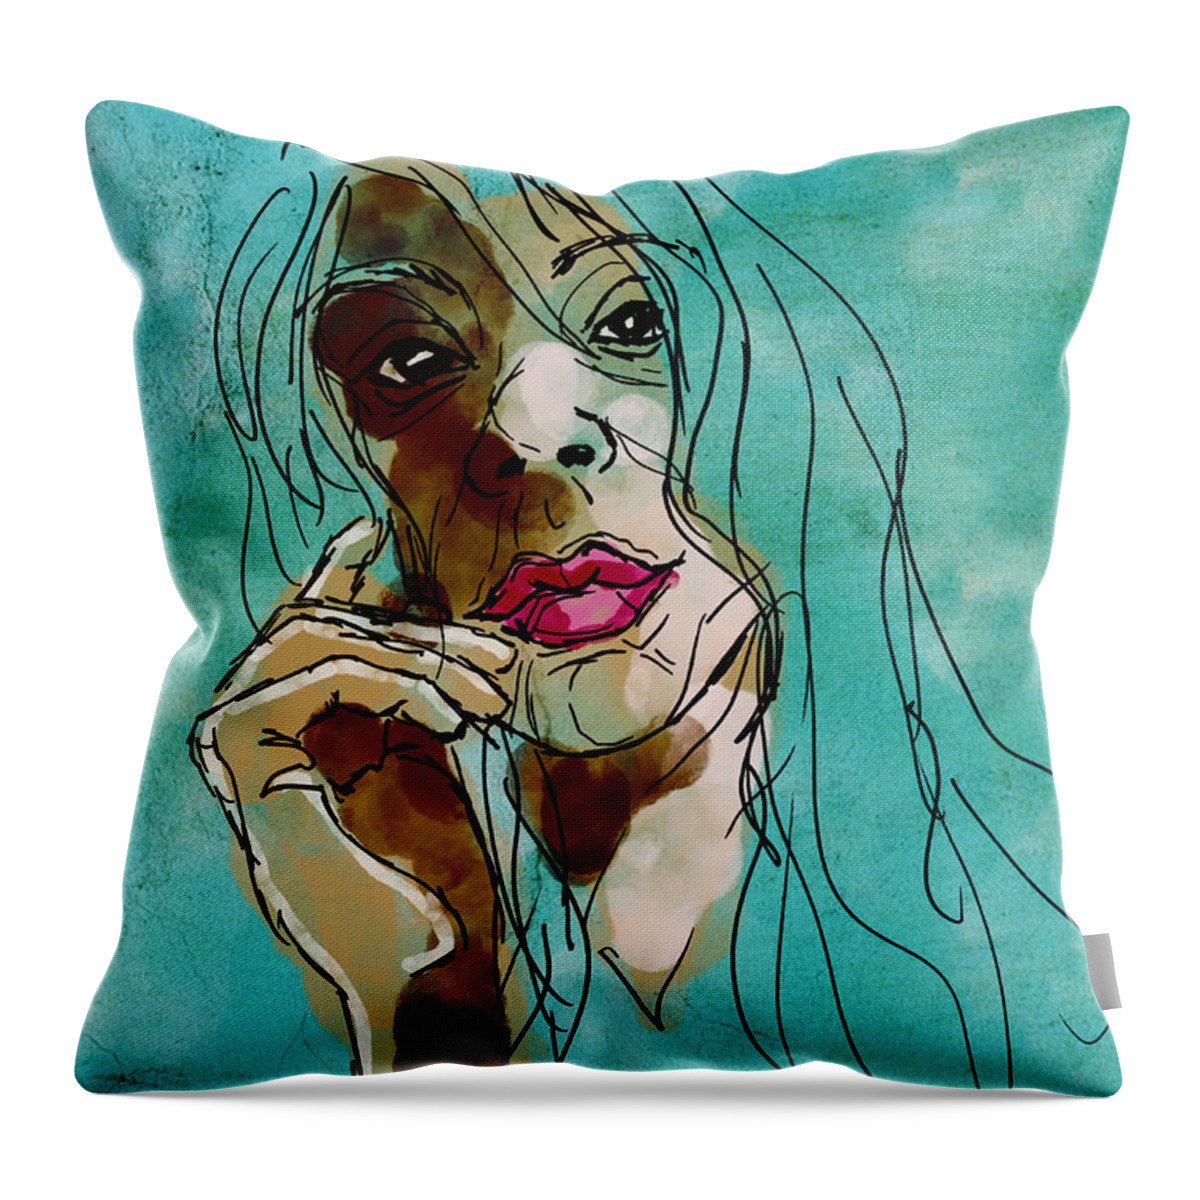 Portrait Throw Pillow featuring the digital art Thought Process by Michael Kallstrom